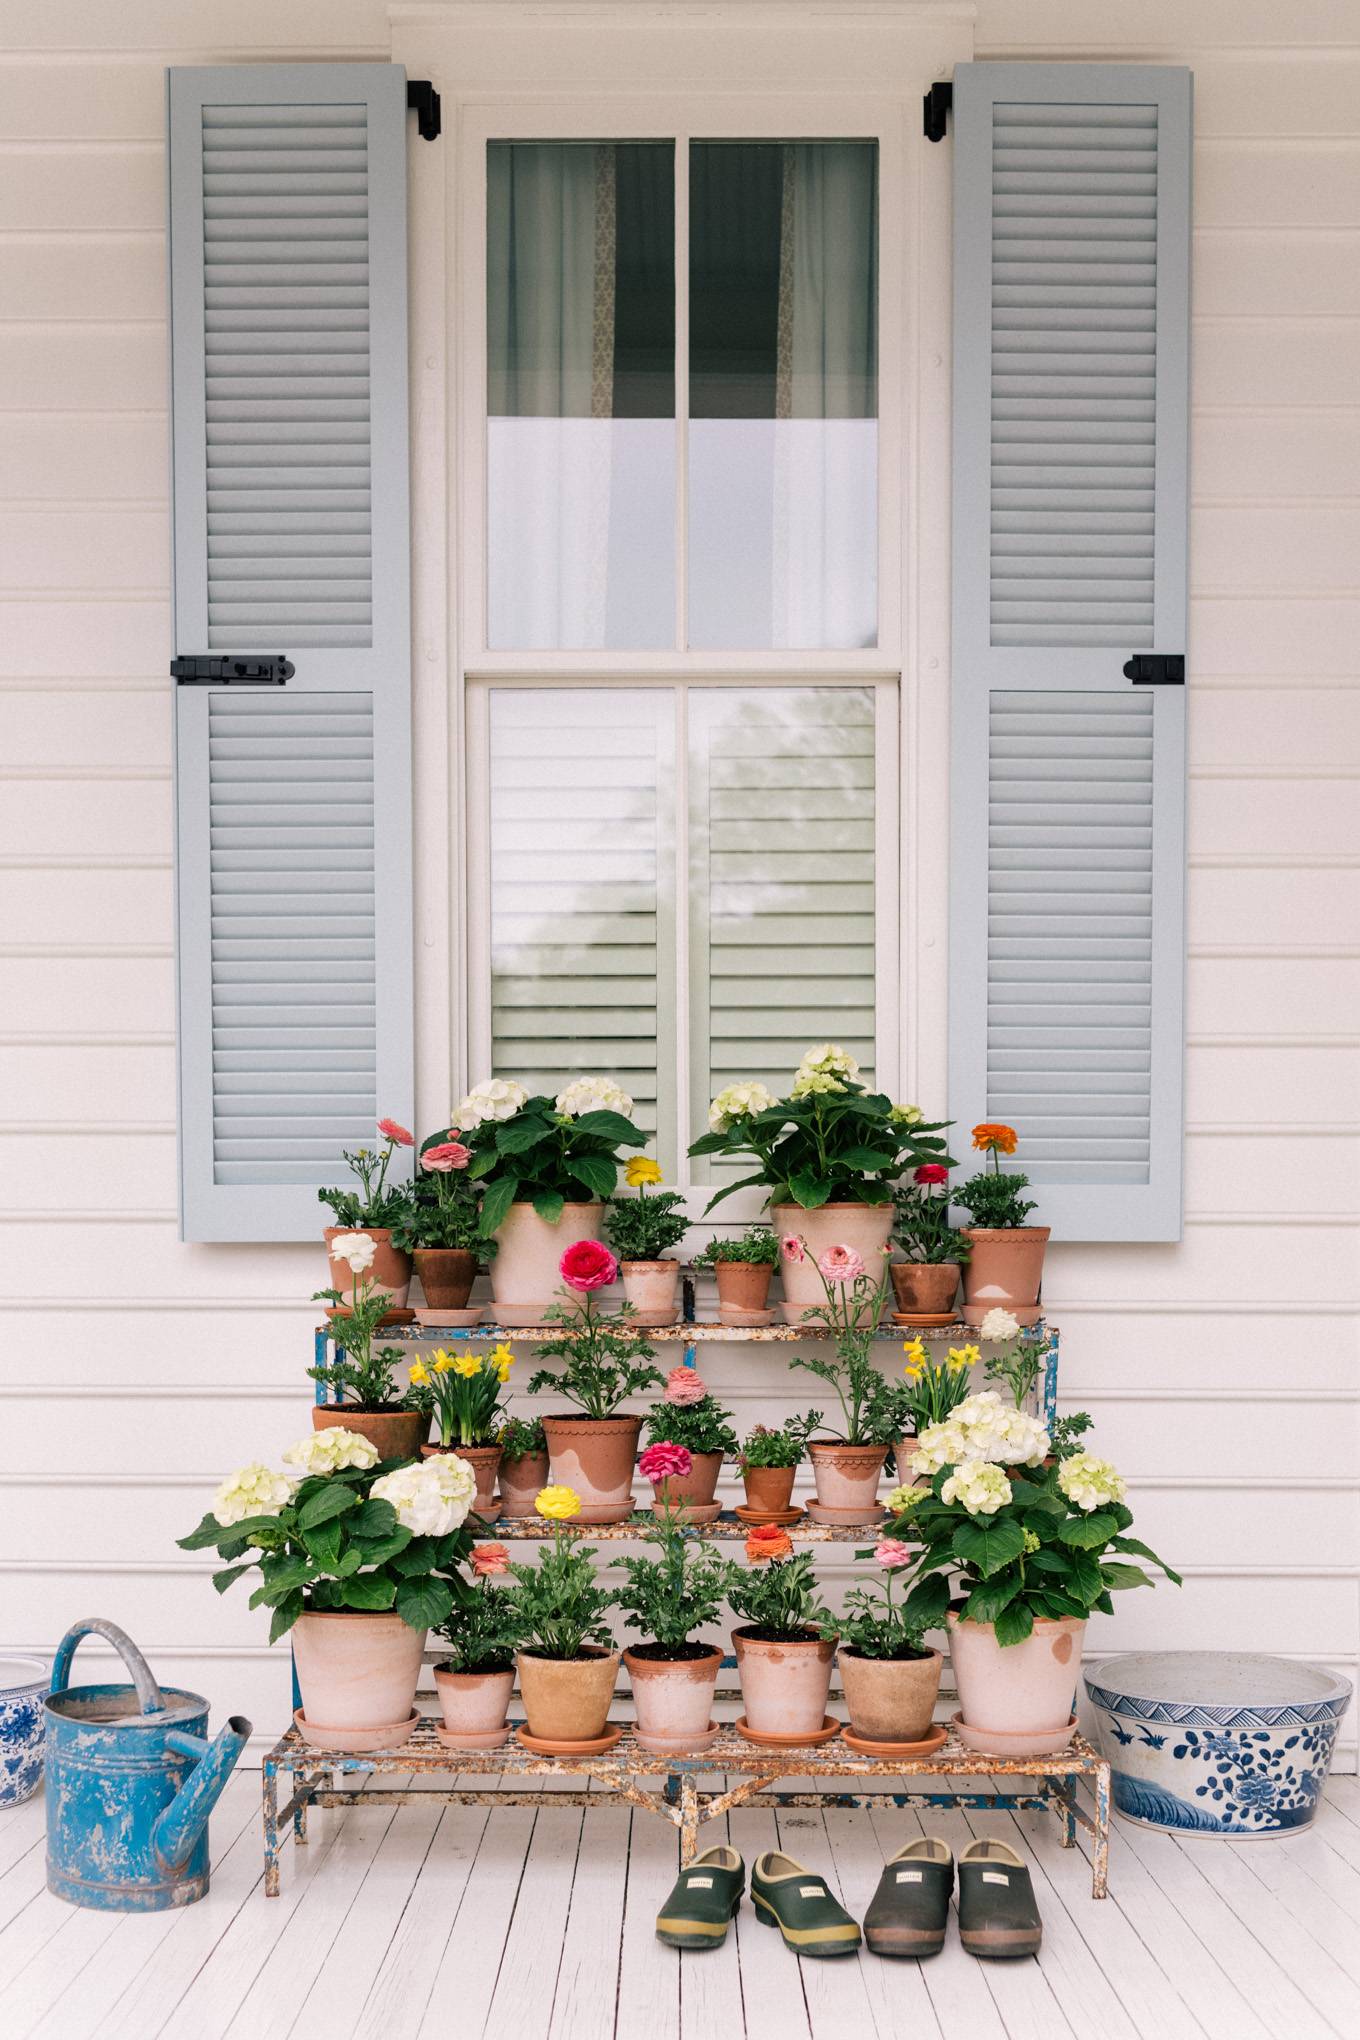 display of a dozen potted plants on front porch next to white window with blue shutters